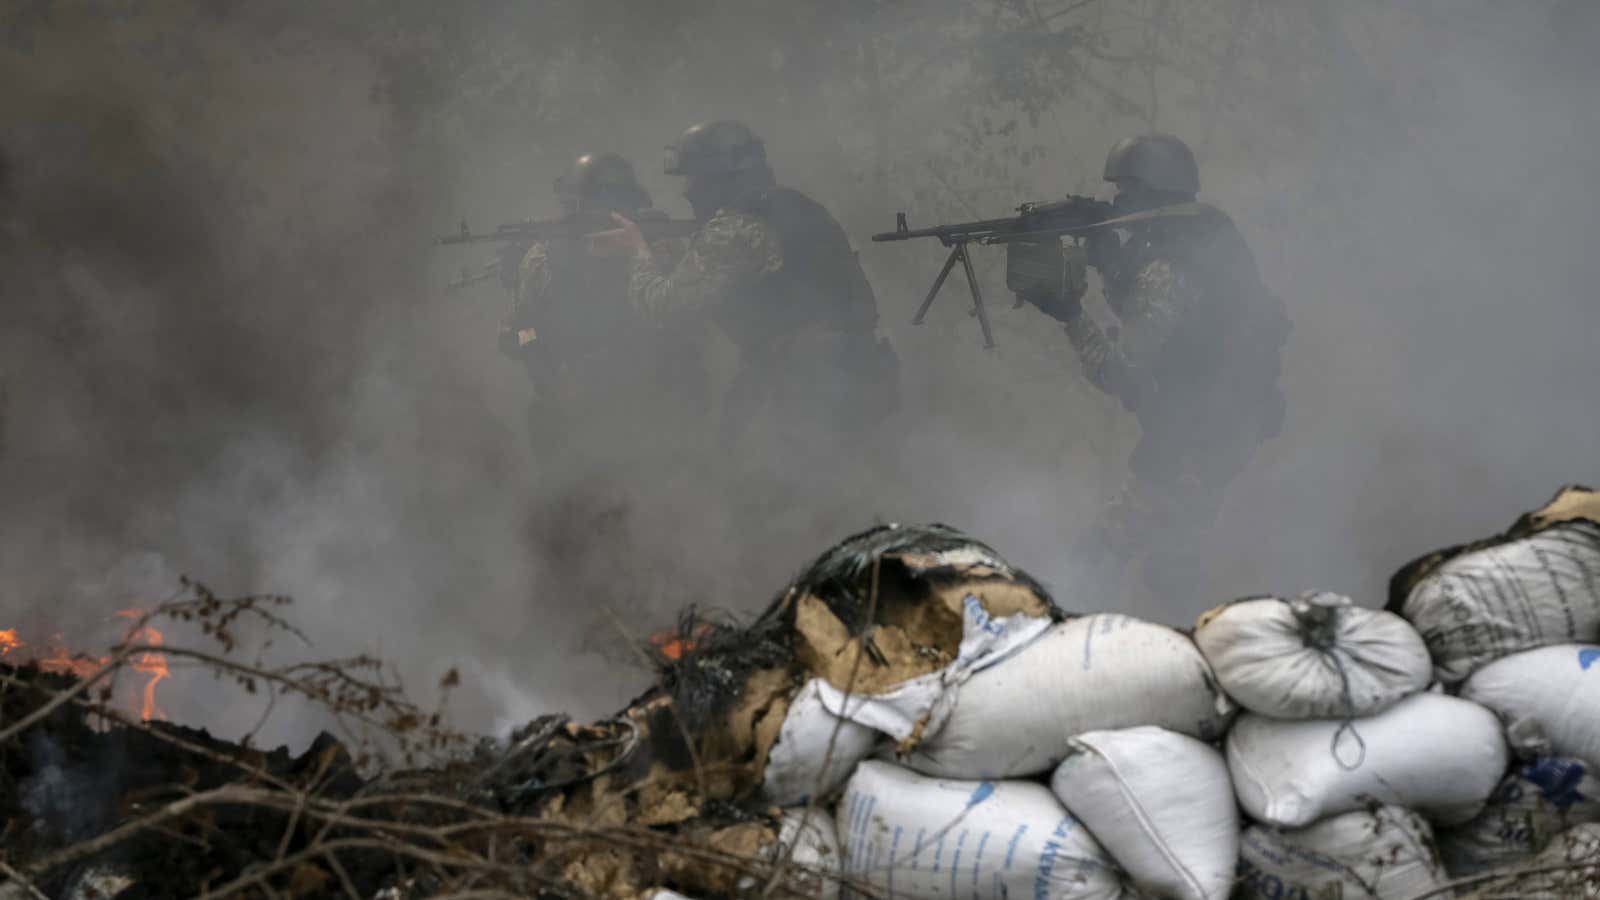 Russia is treating the presence of Ukrainian troops on Ukrainian soil as military aggression.